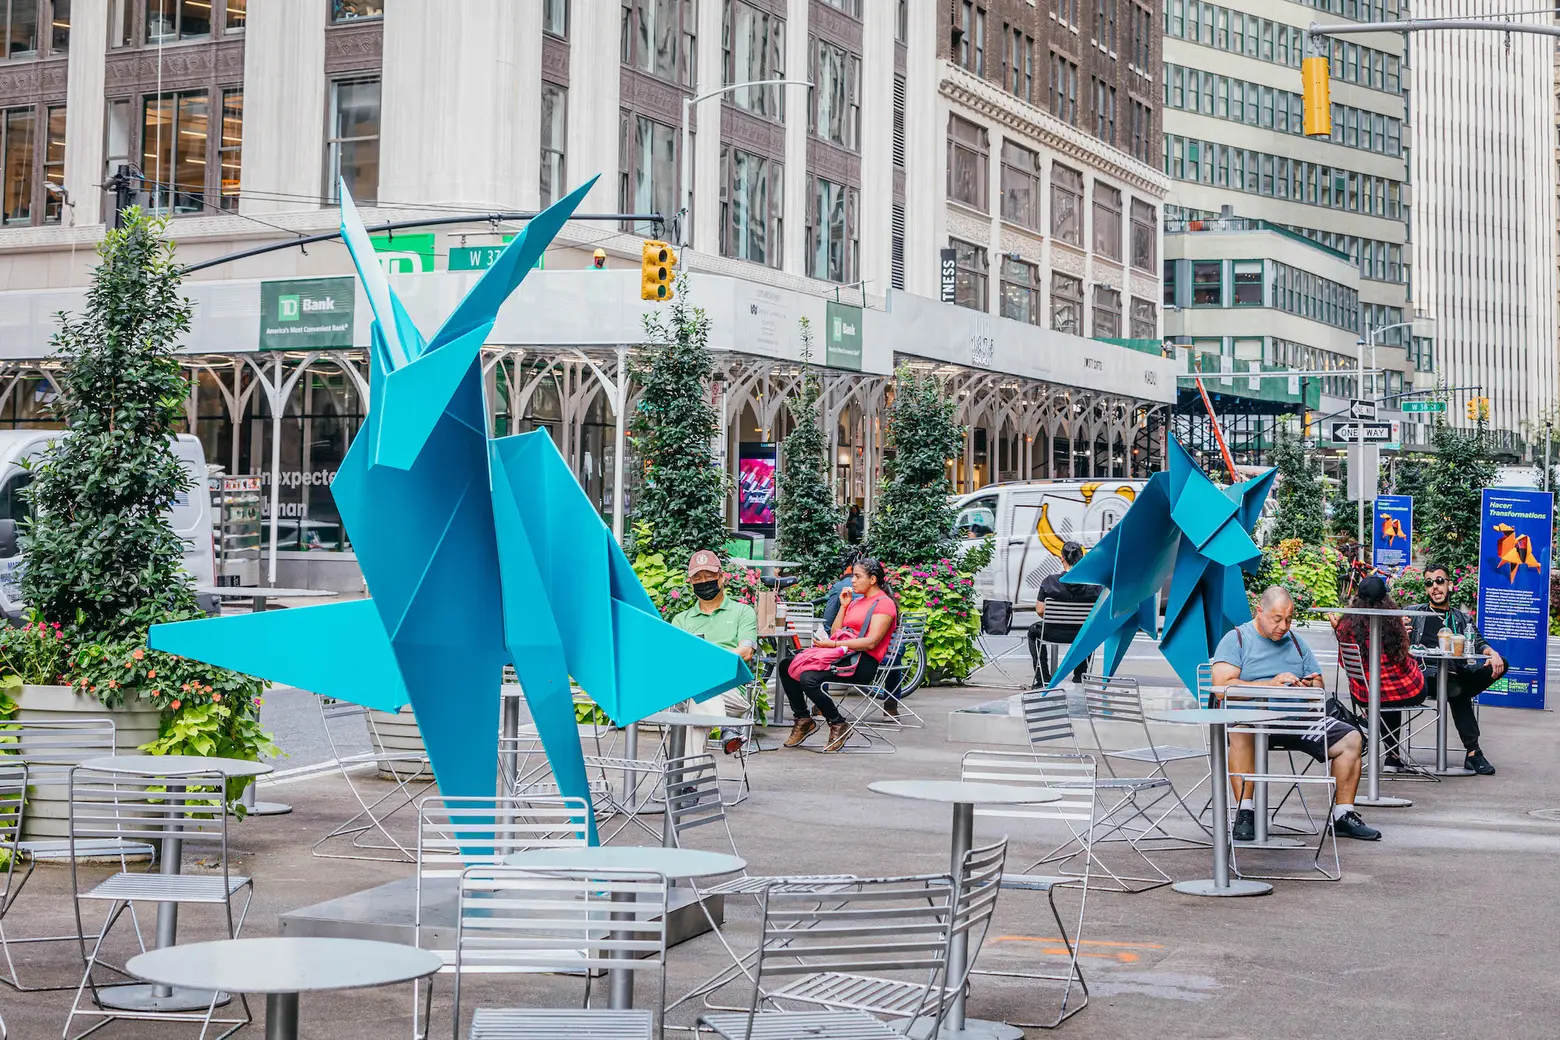 Supersized origami sculptures land in NYC’s Garment District